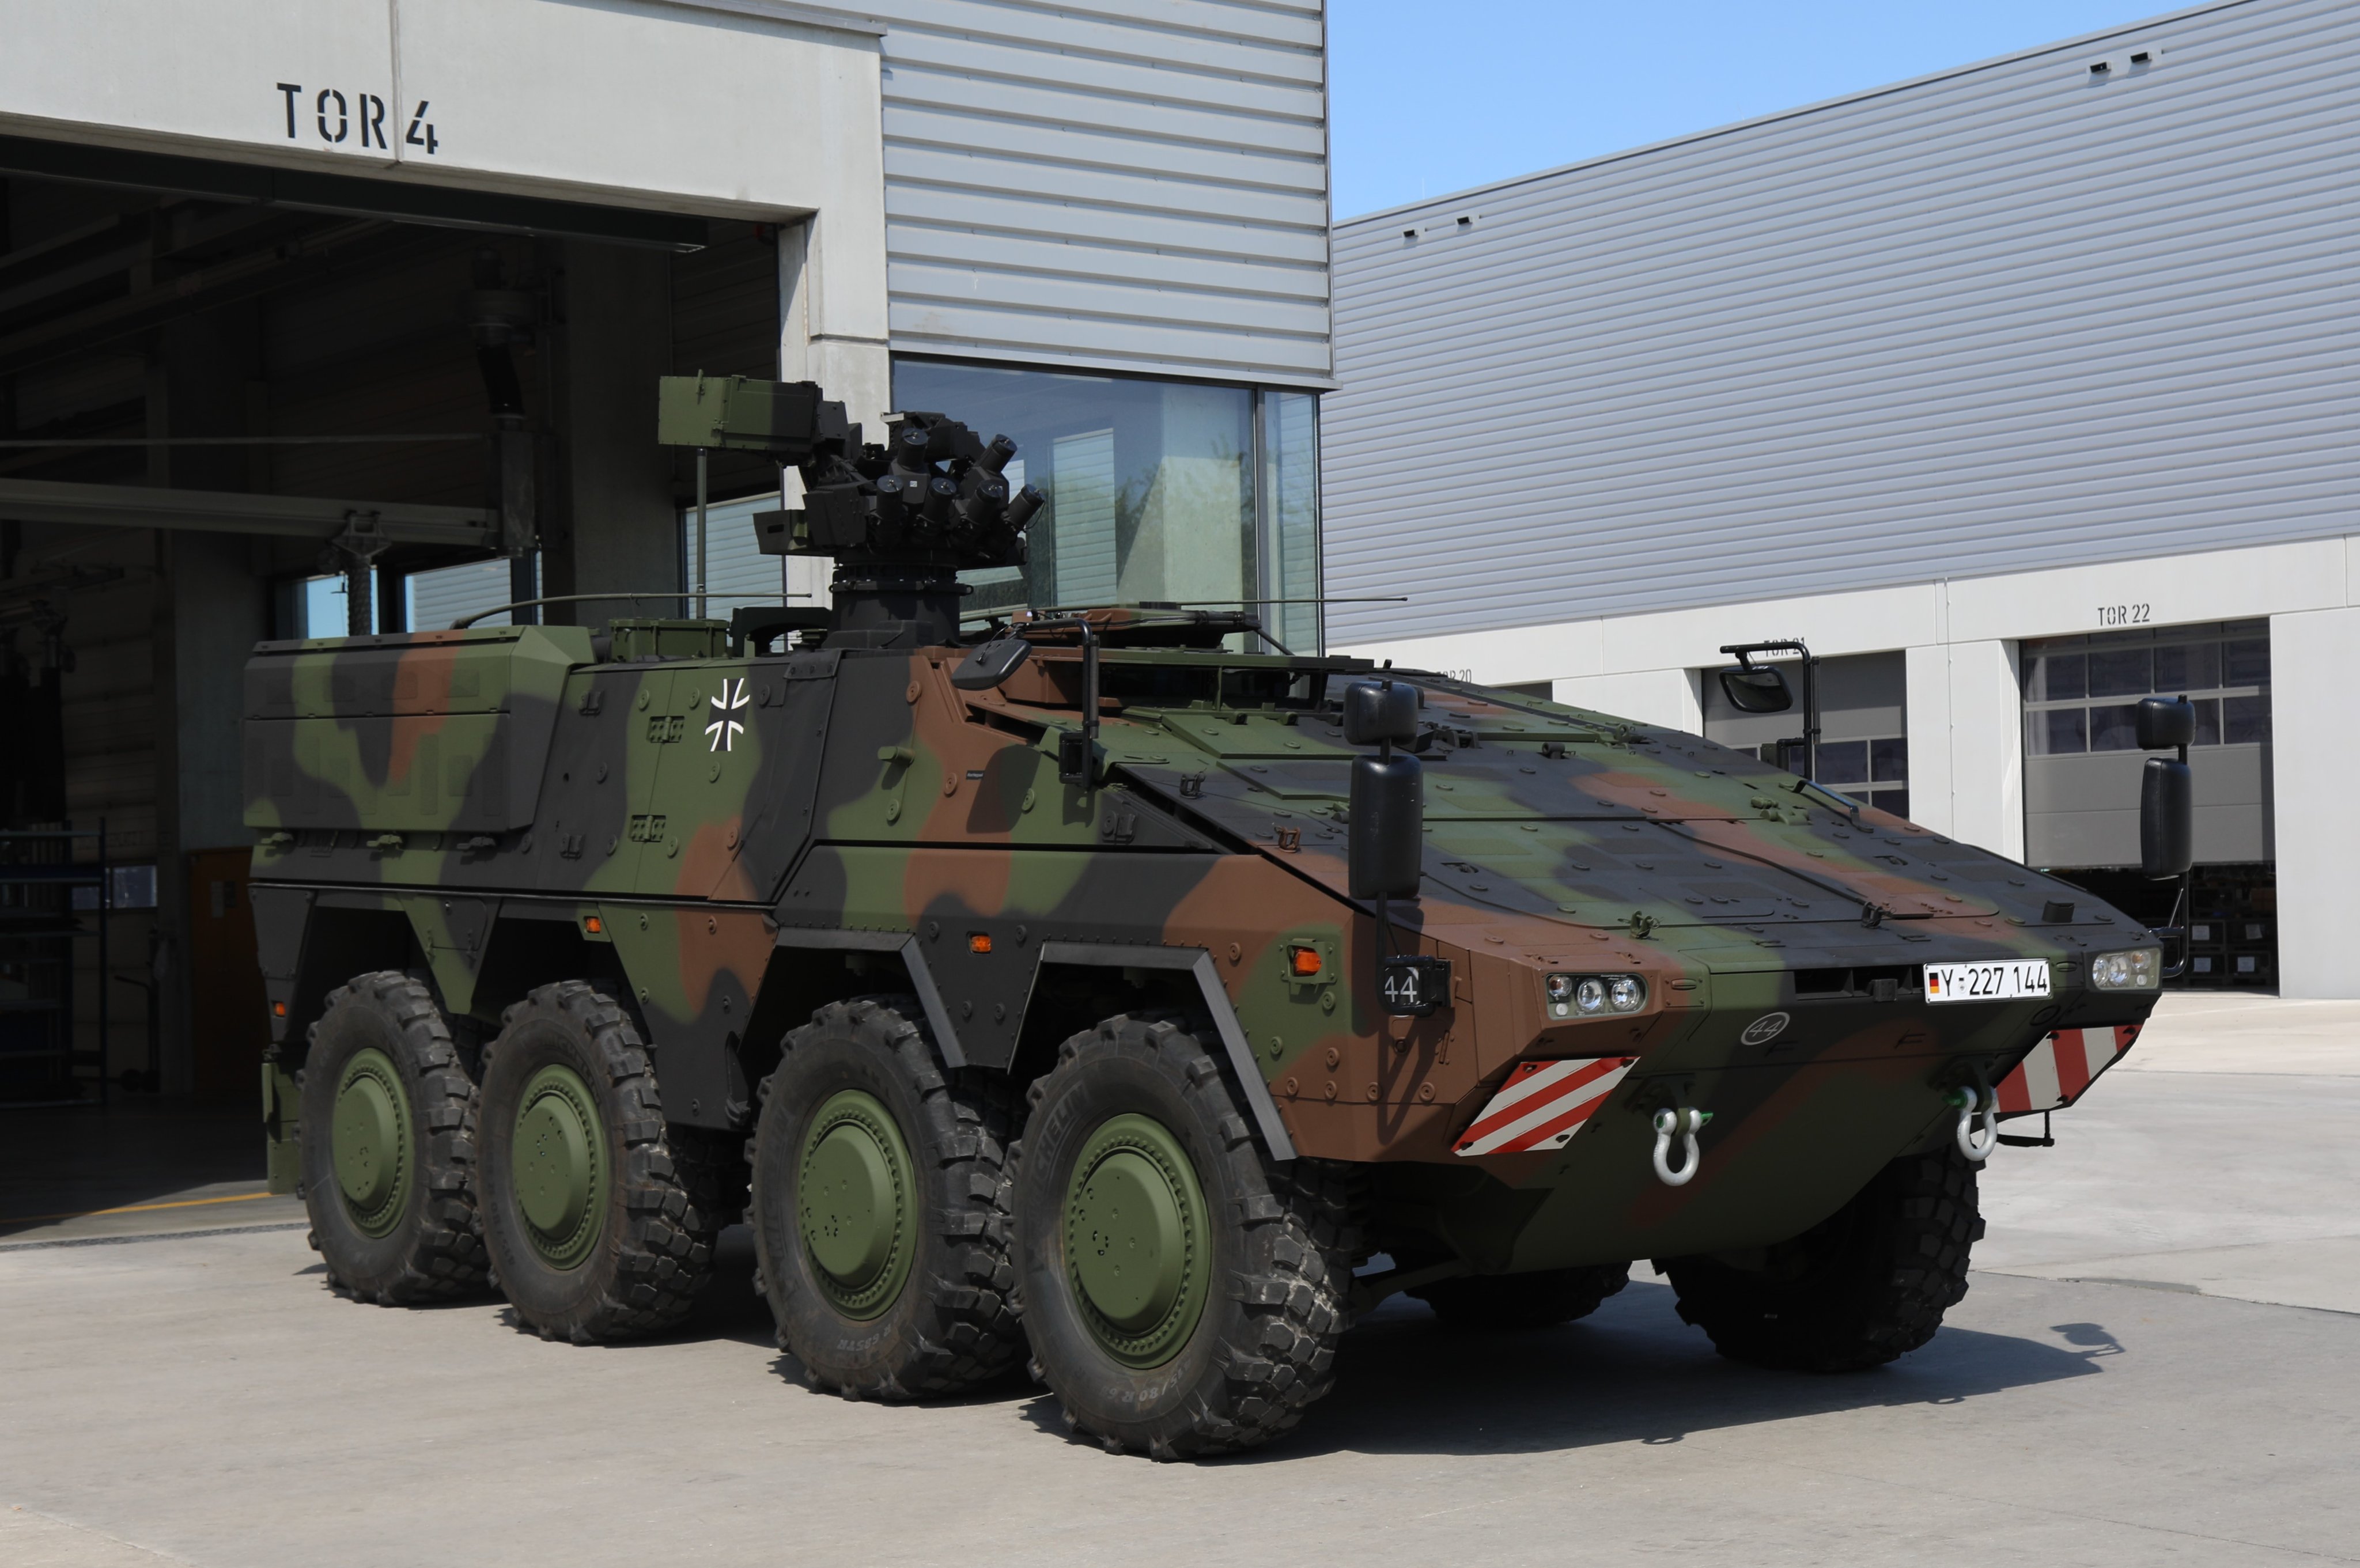 , officially handed over the last of 131 BOXER APCs of the 2nd batch in the version GTFz A2 to representatives of the German MoD, Bundeswehr and the Federal procurement agency